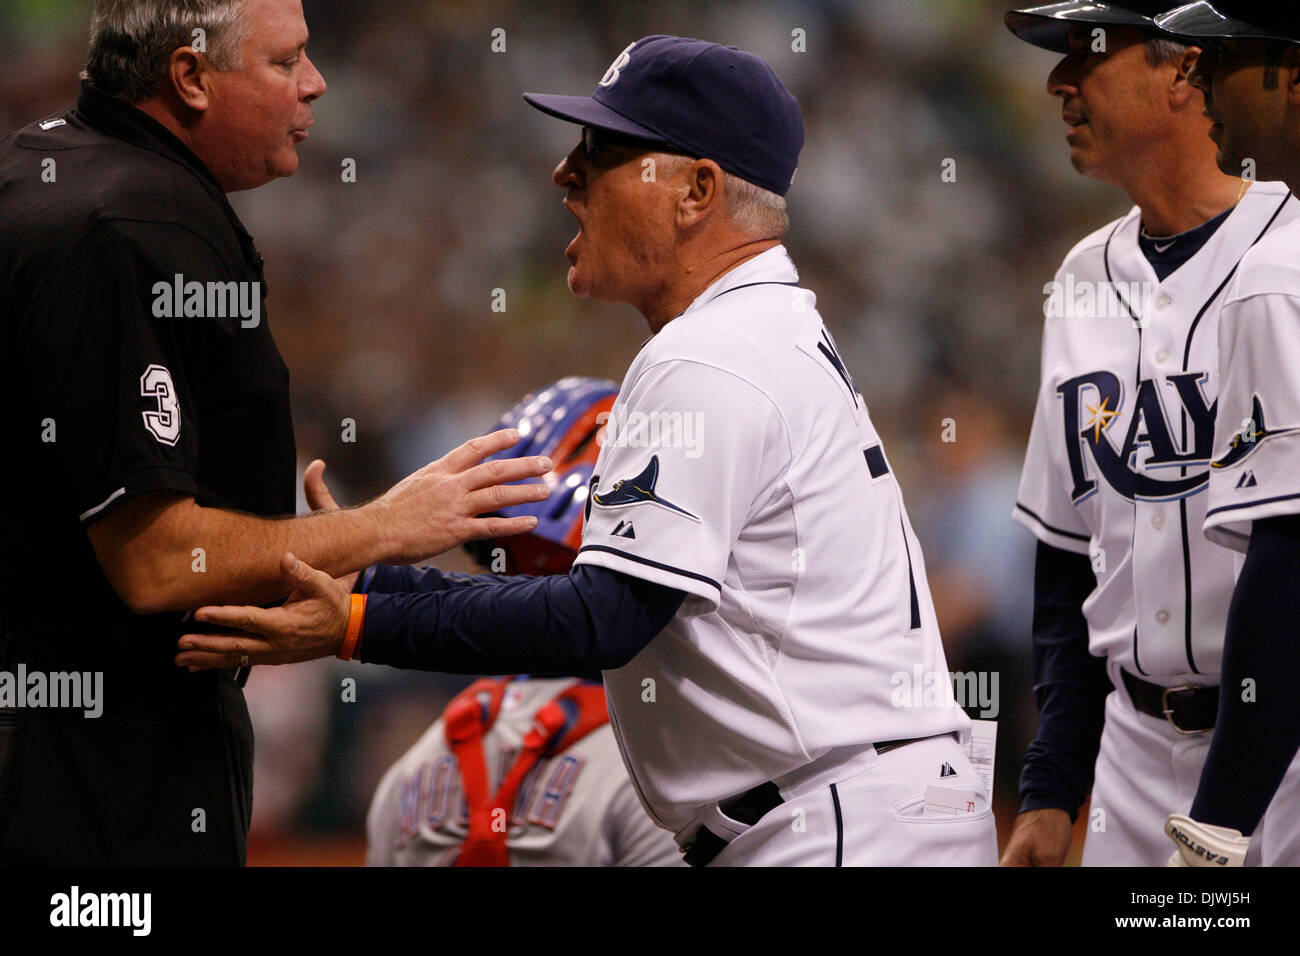 Oct. 6, 2010 - St. Petersburg, FL - BRUCE MOYER / TIMES.SP 329177 MOYE Rays 01.CAPTION: (10/06/10)(St. Petersburg, FL) Tampa Bay manager Joe Maddon (center) argues with home plate umpire Tim Welke (left) in the first inning. Maddon felt that Carlos Pena was hit by a pitch during the Tampa Bay Rays ALDS playoff game against The Texas Rangers at Tropicana Field on Wednesday, Oct. 10, Stock Photo